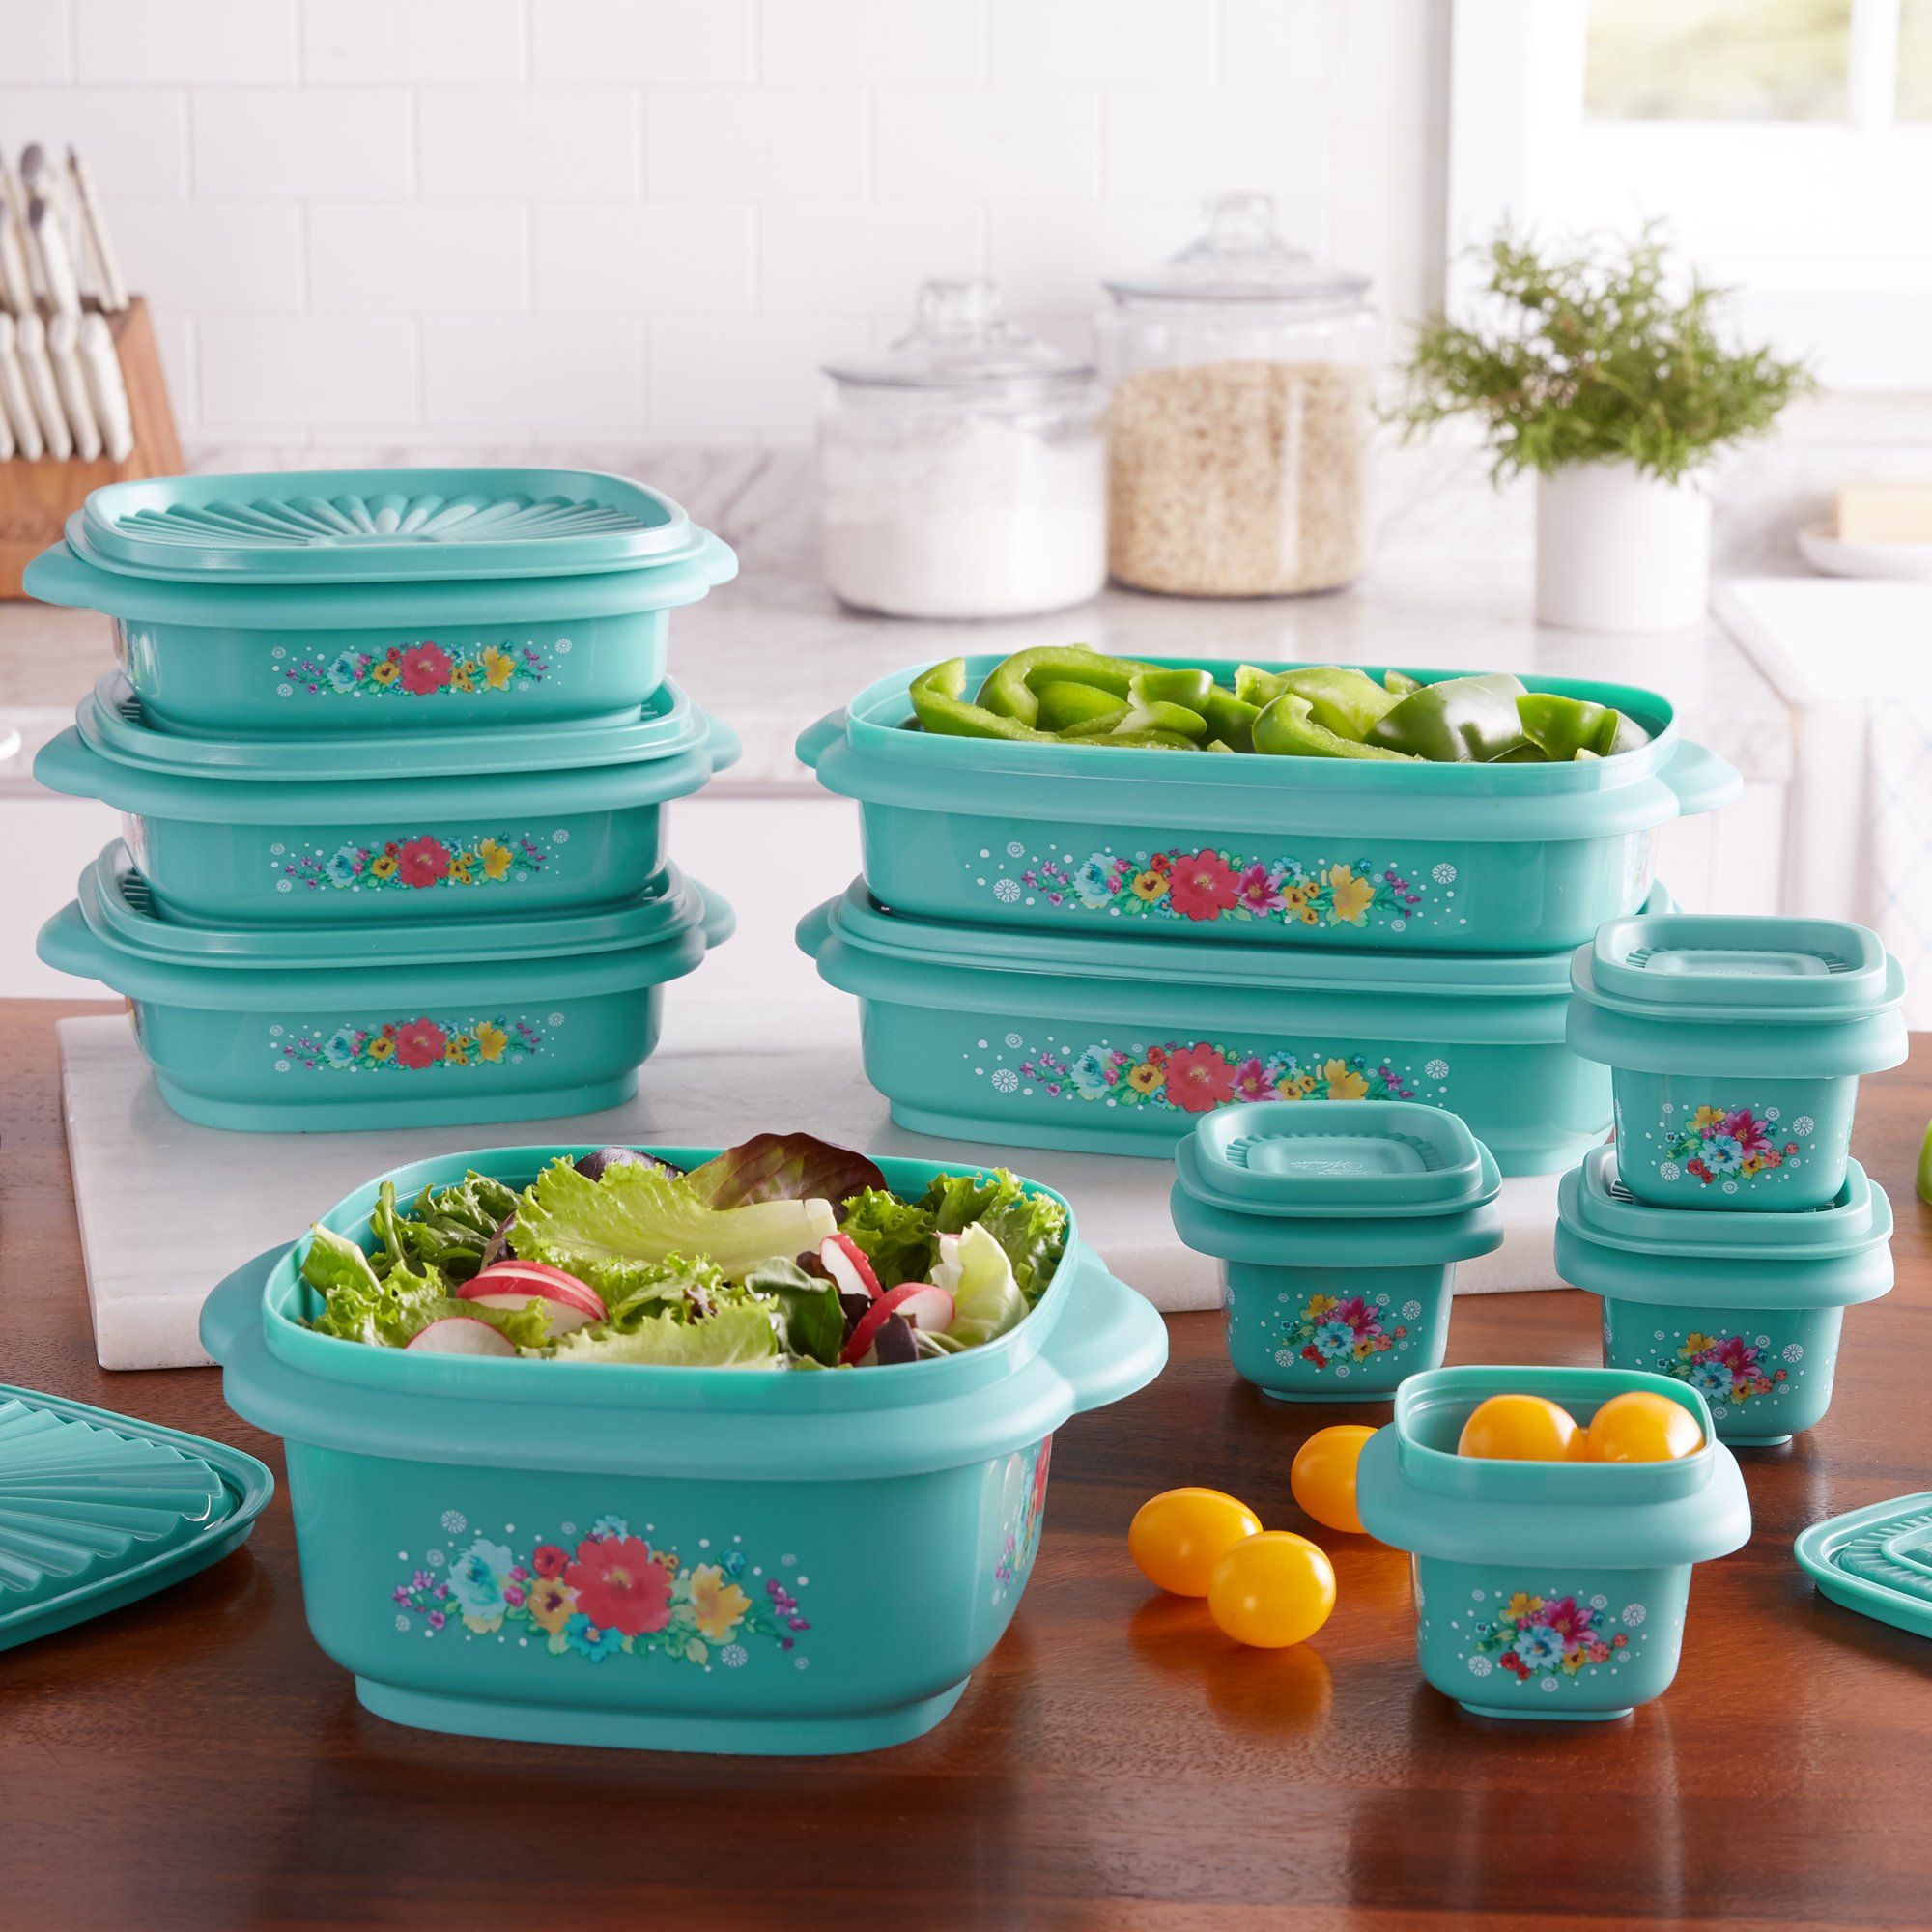 Tupperware 12pc Square Stacking Food Storage Containers with Lids - Green